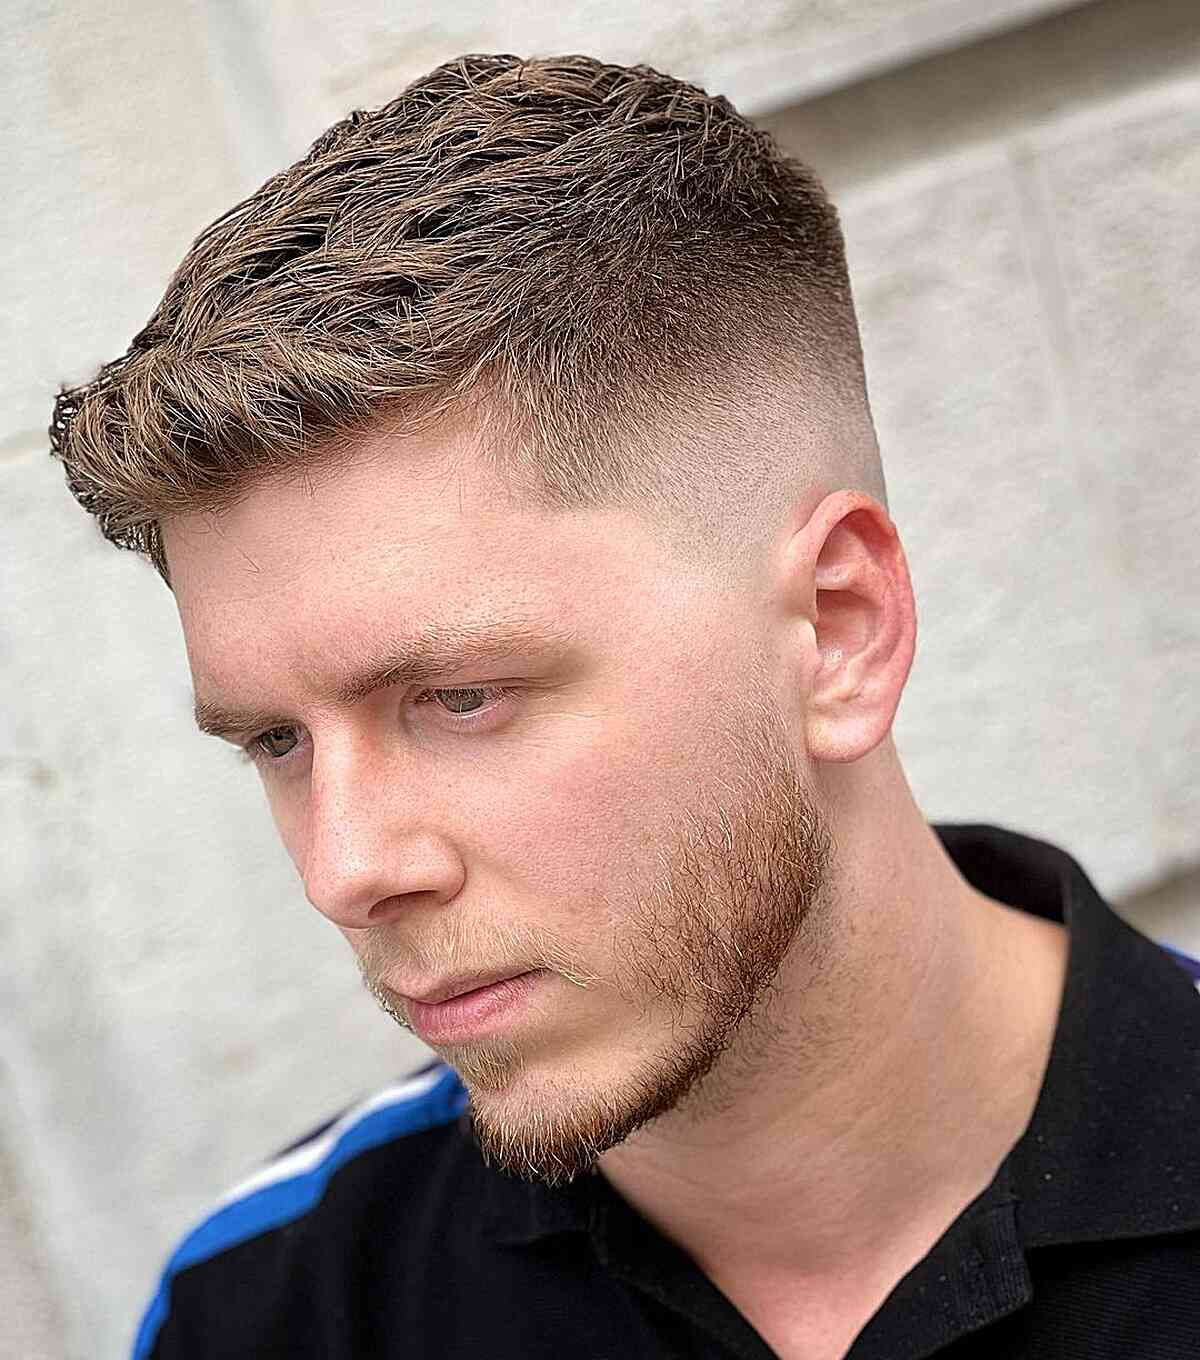 Textured and Faded Short Ivy League on Men's Wavy Hair